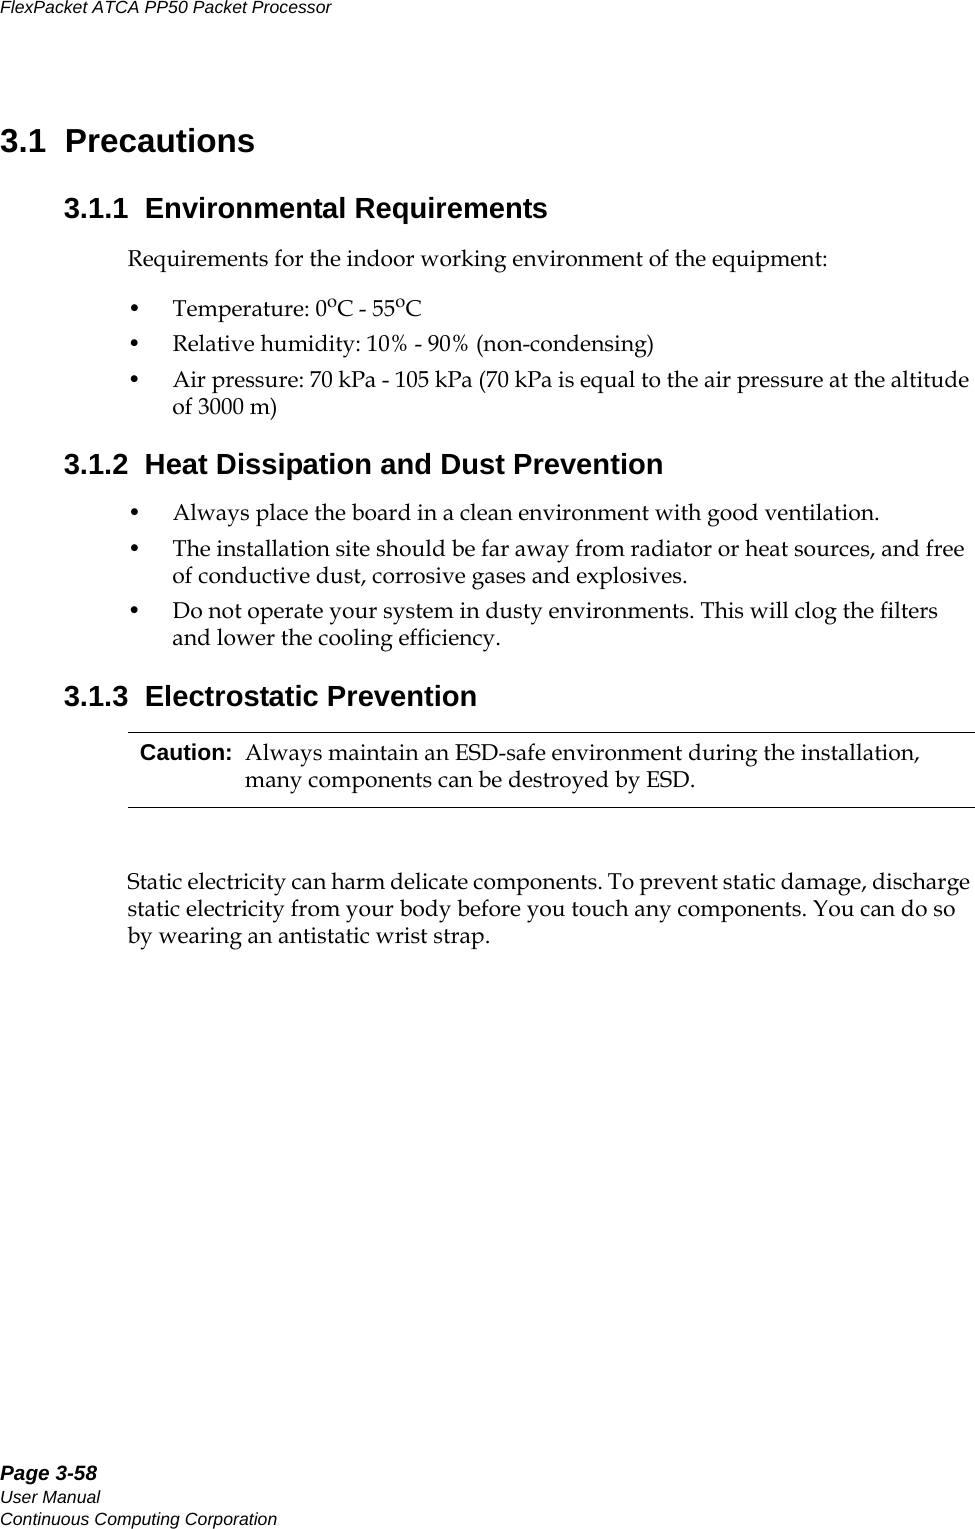 Page 3-58User ManualContinuous Computing CorporationFlexPacket ATCA PP50 Packet Processor     Preliminary3.1  Precautions3.1.1  Environmental RequirementsRequirements for the indoor working environment of the equipment: • Temperature: 0oC - 55oC• Relative humidity: 10% - 90% (non-condensing)• Air pressure: 70 kPa - 105 kPa (70 kPa is equal to the air pressure at the altitude of 3000 m)3.1.2  Heat Dissipation and Dust Prevention • Always place the board in a clean environment with good ventilation. • The installation site should be far away from radiator or heat sources, and free of conductive dust, corrosive gases and explosives. • Do not operate your system in dusty environments. This will clog the filters and lower the cooling efficiency.3.1.3  Electrostatic PreventionStatic electricity can harm delicate components. To prevent static damage, discharge static electricity from your body before you touch any components. You can do so by wearing an antistatic wrist strap. Caution: Always maintain an ESD-safe environment during the installation, many components can be destroyed by ESD.